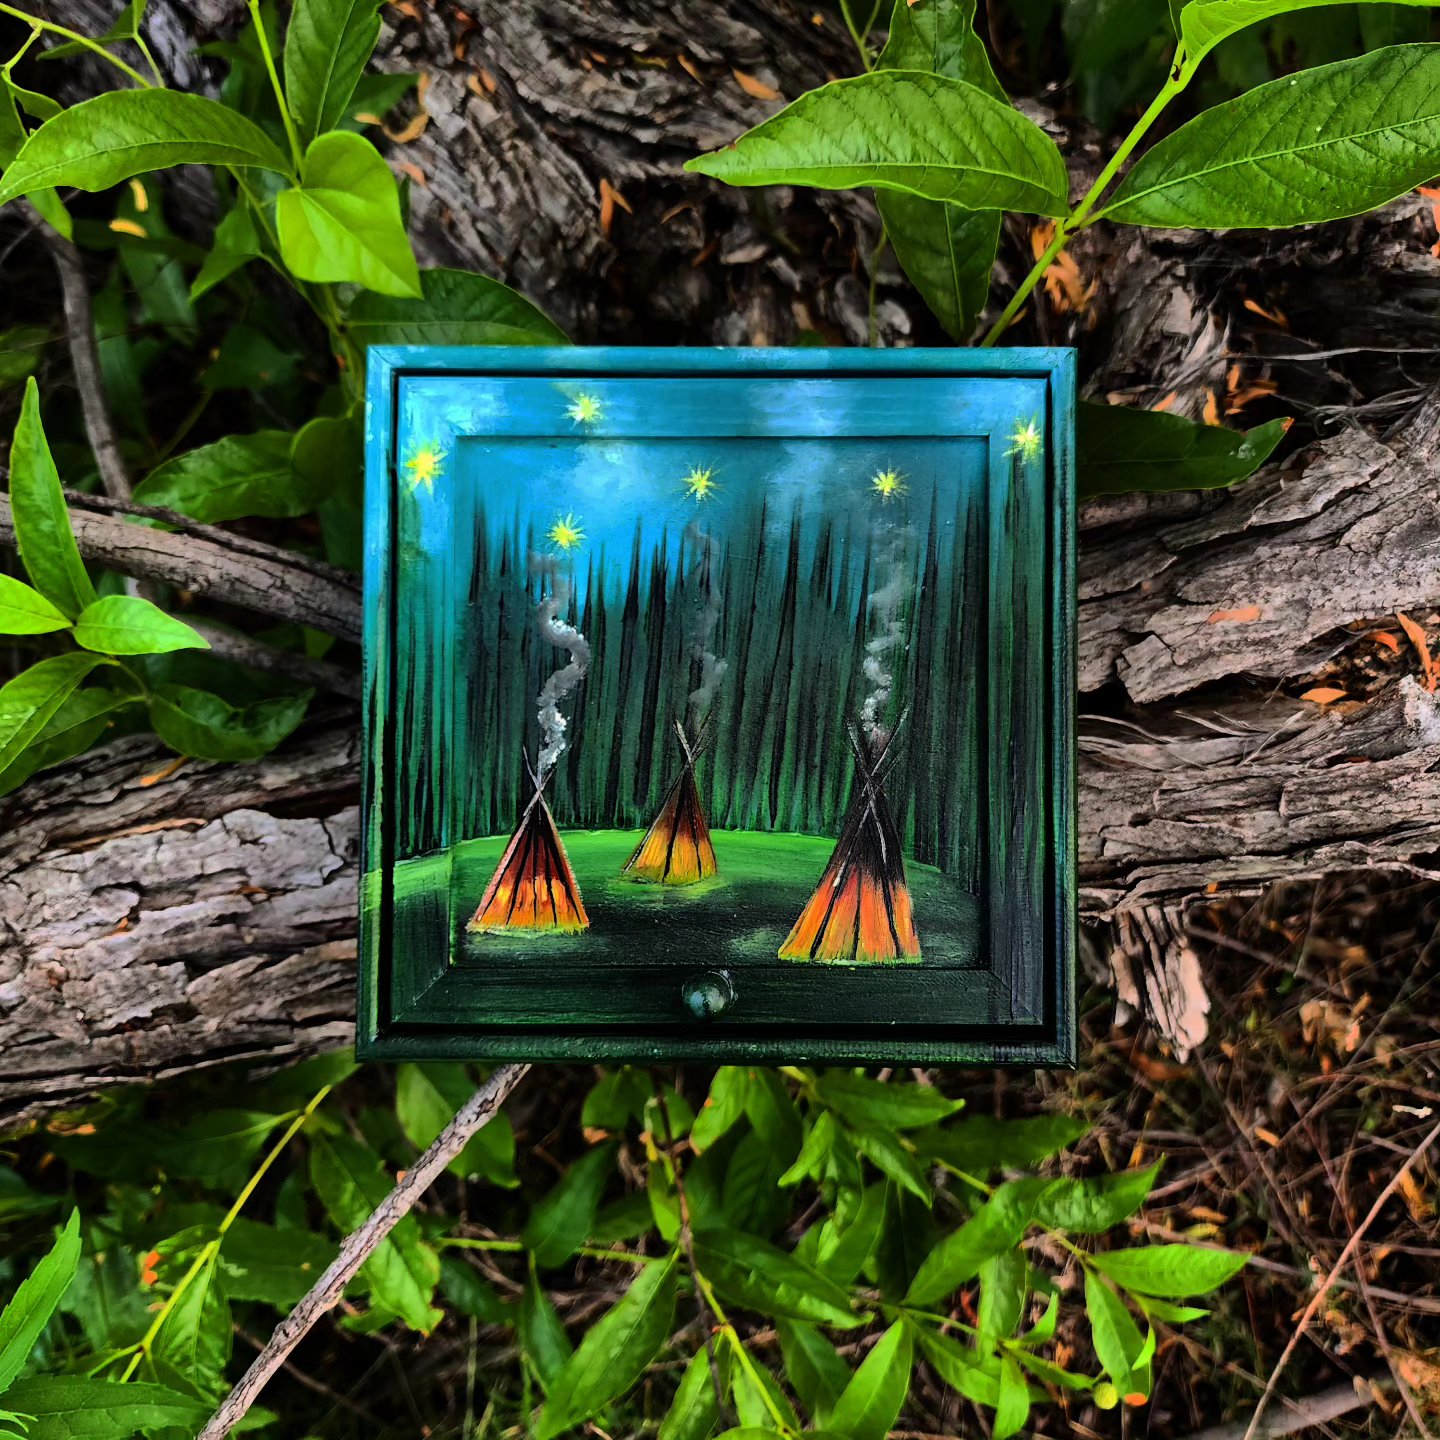 Beautiful handpainted wooden trinket box with a mirror and metal feet. This cute tepees trinket box is an ideal gift for a special loved one. You can store jewelry such as rings, necklaces, bracelets, or anything you would like to keep in a particular place, especially in this elegant and artistic trinket box.